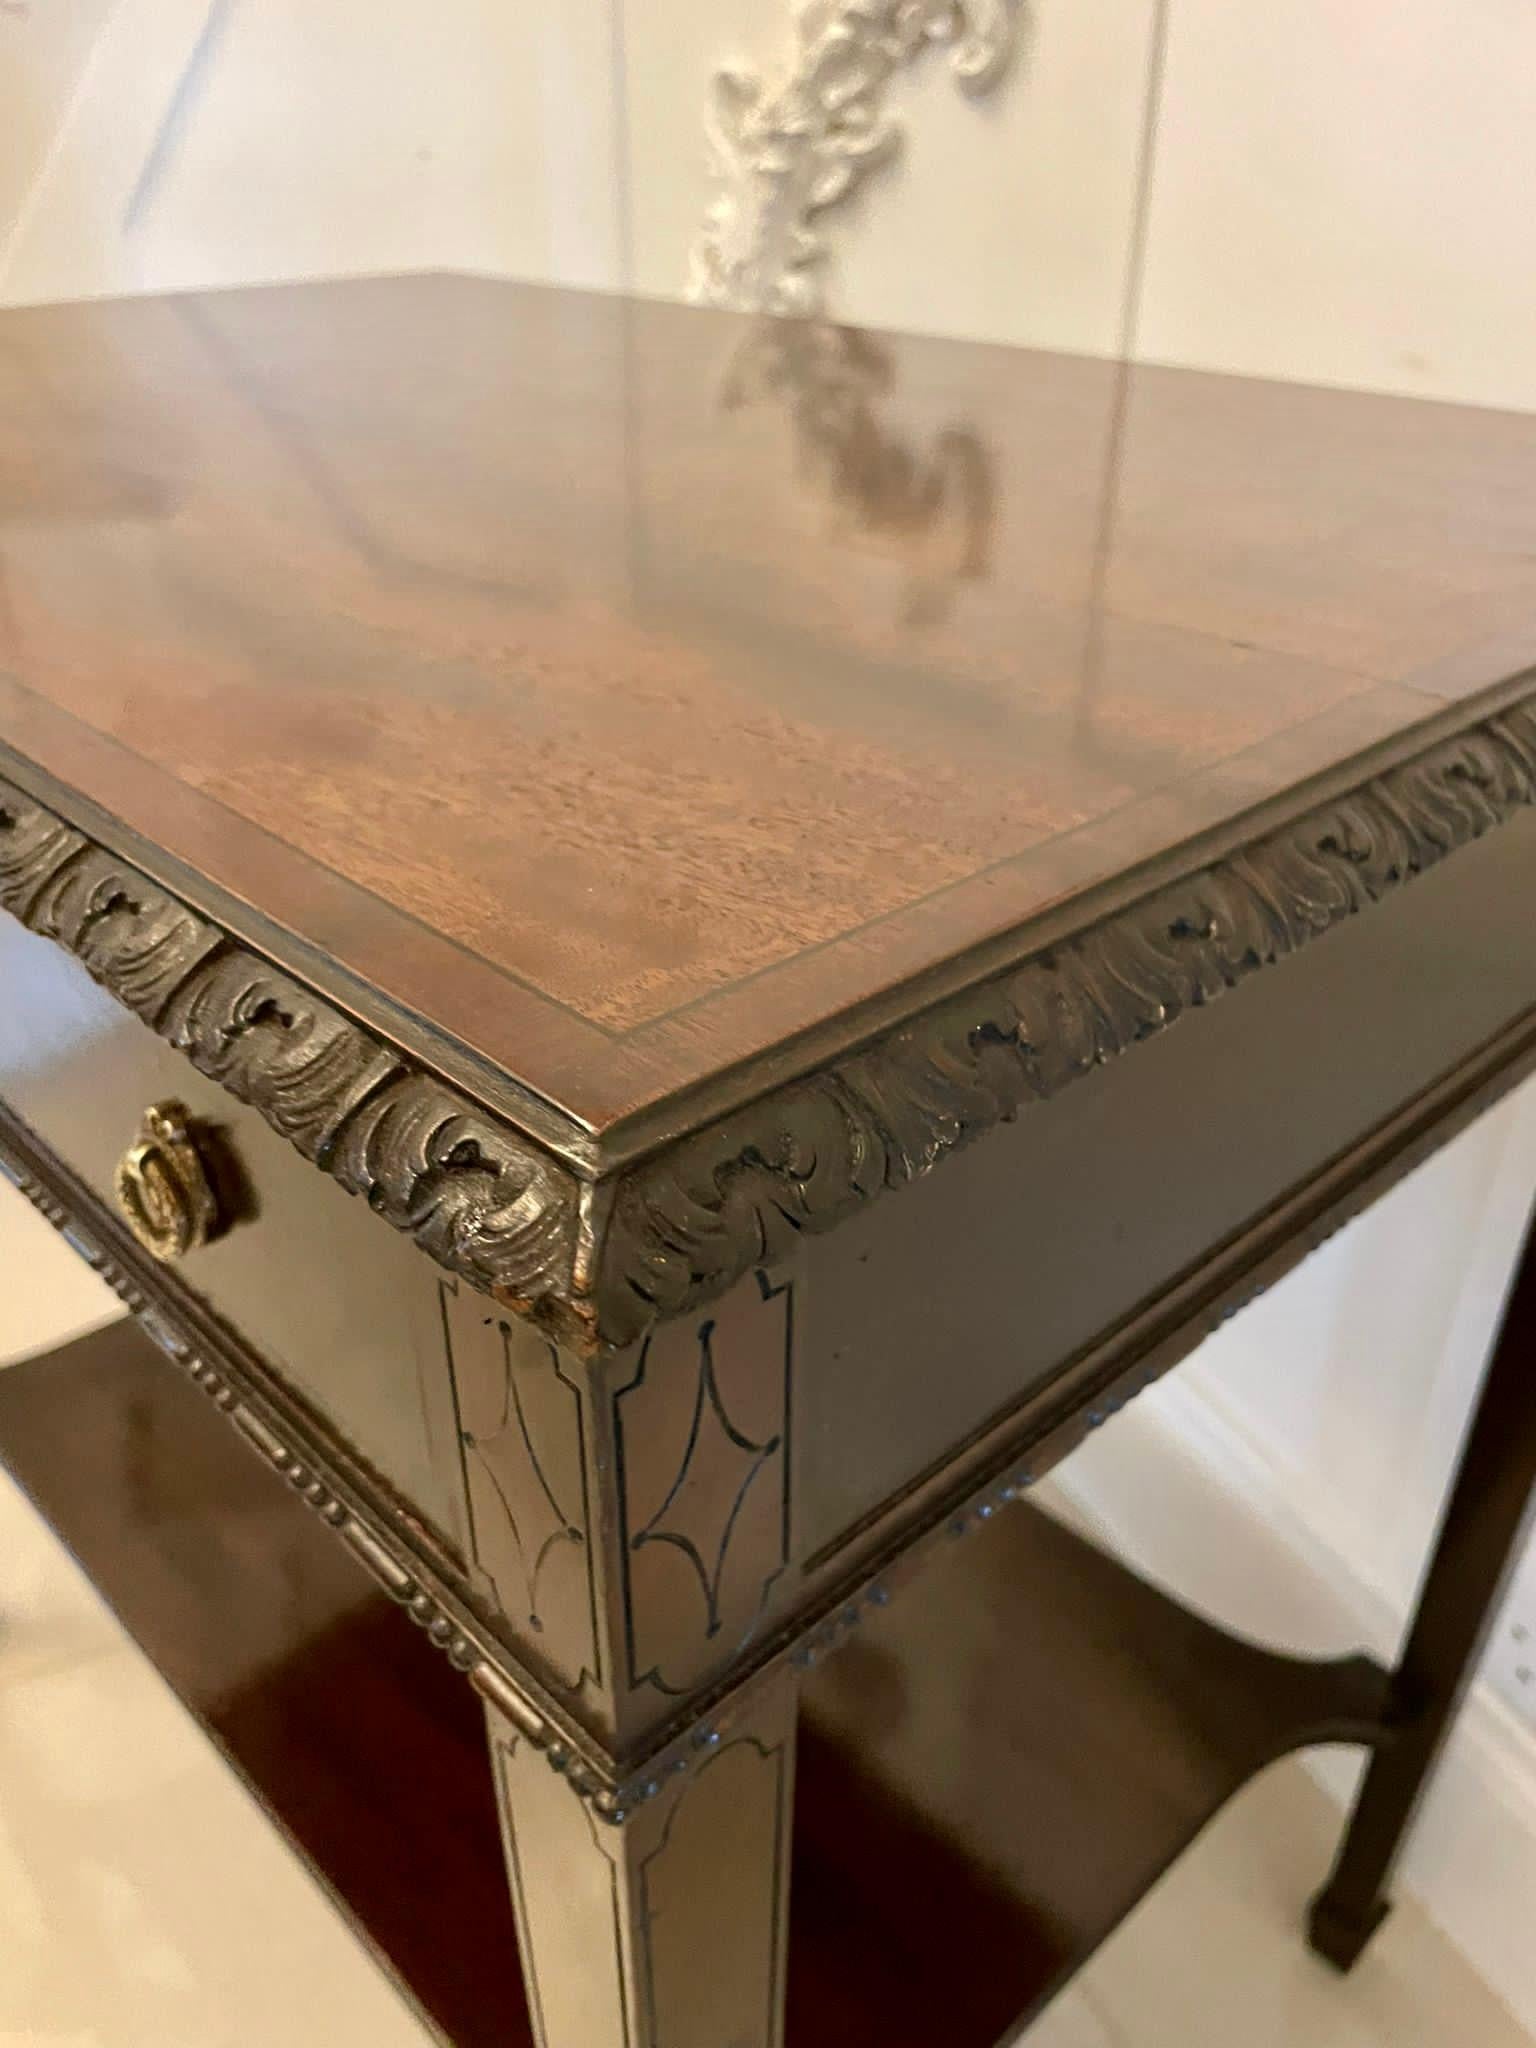 Quality Edwardian mahogany free standing side/lamp table having a glorious mahogany top with a quality carved edge, two frieze drawers with original brass handles standing on four elegant square tapering legs with spade feet united by a shaped